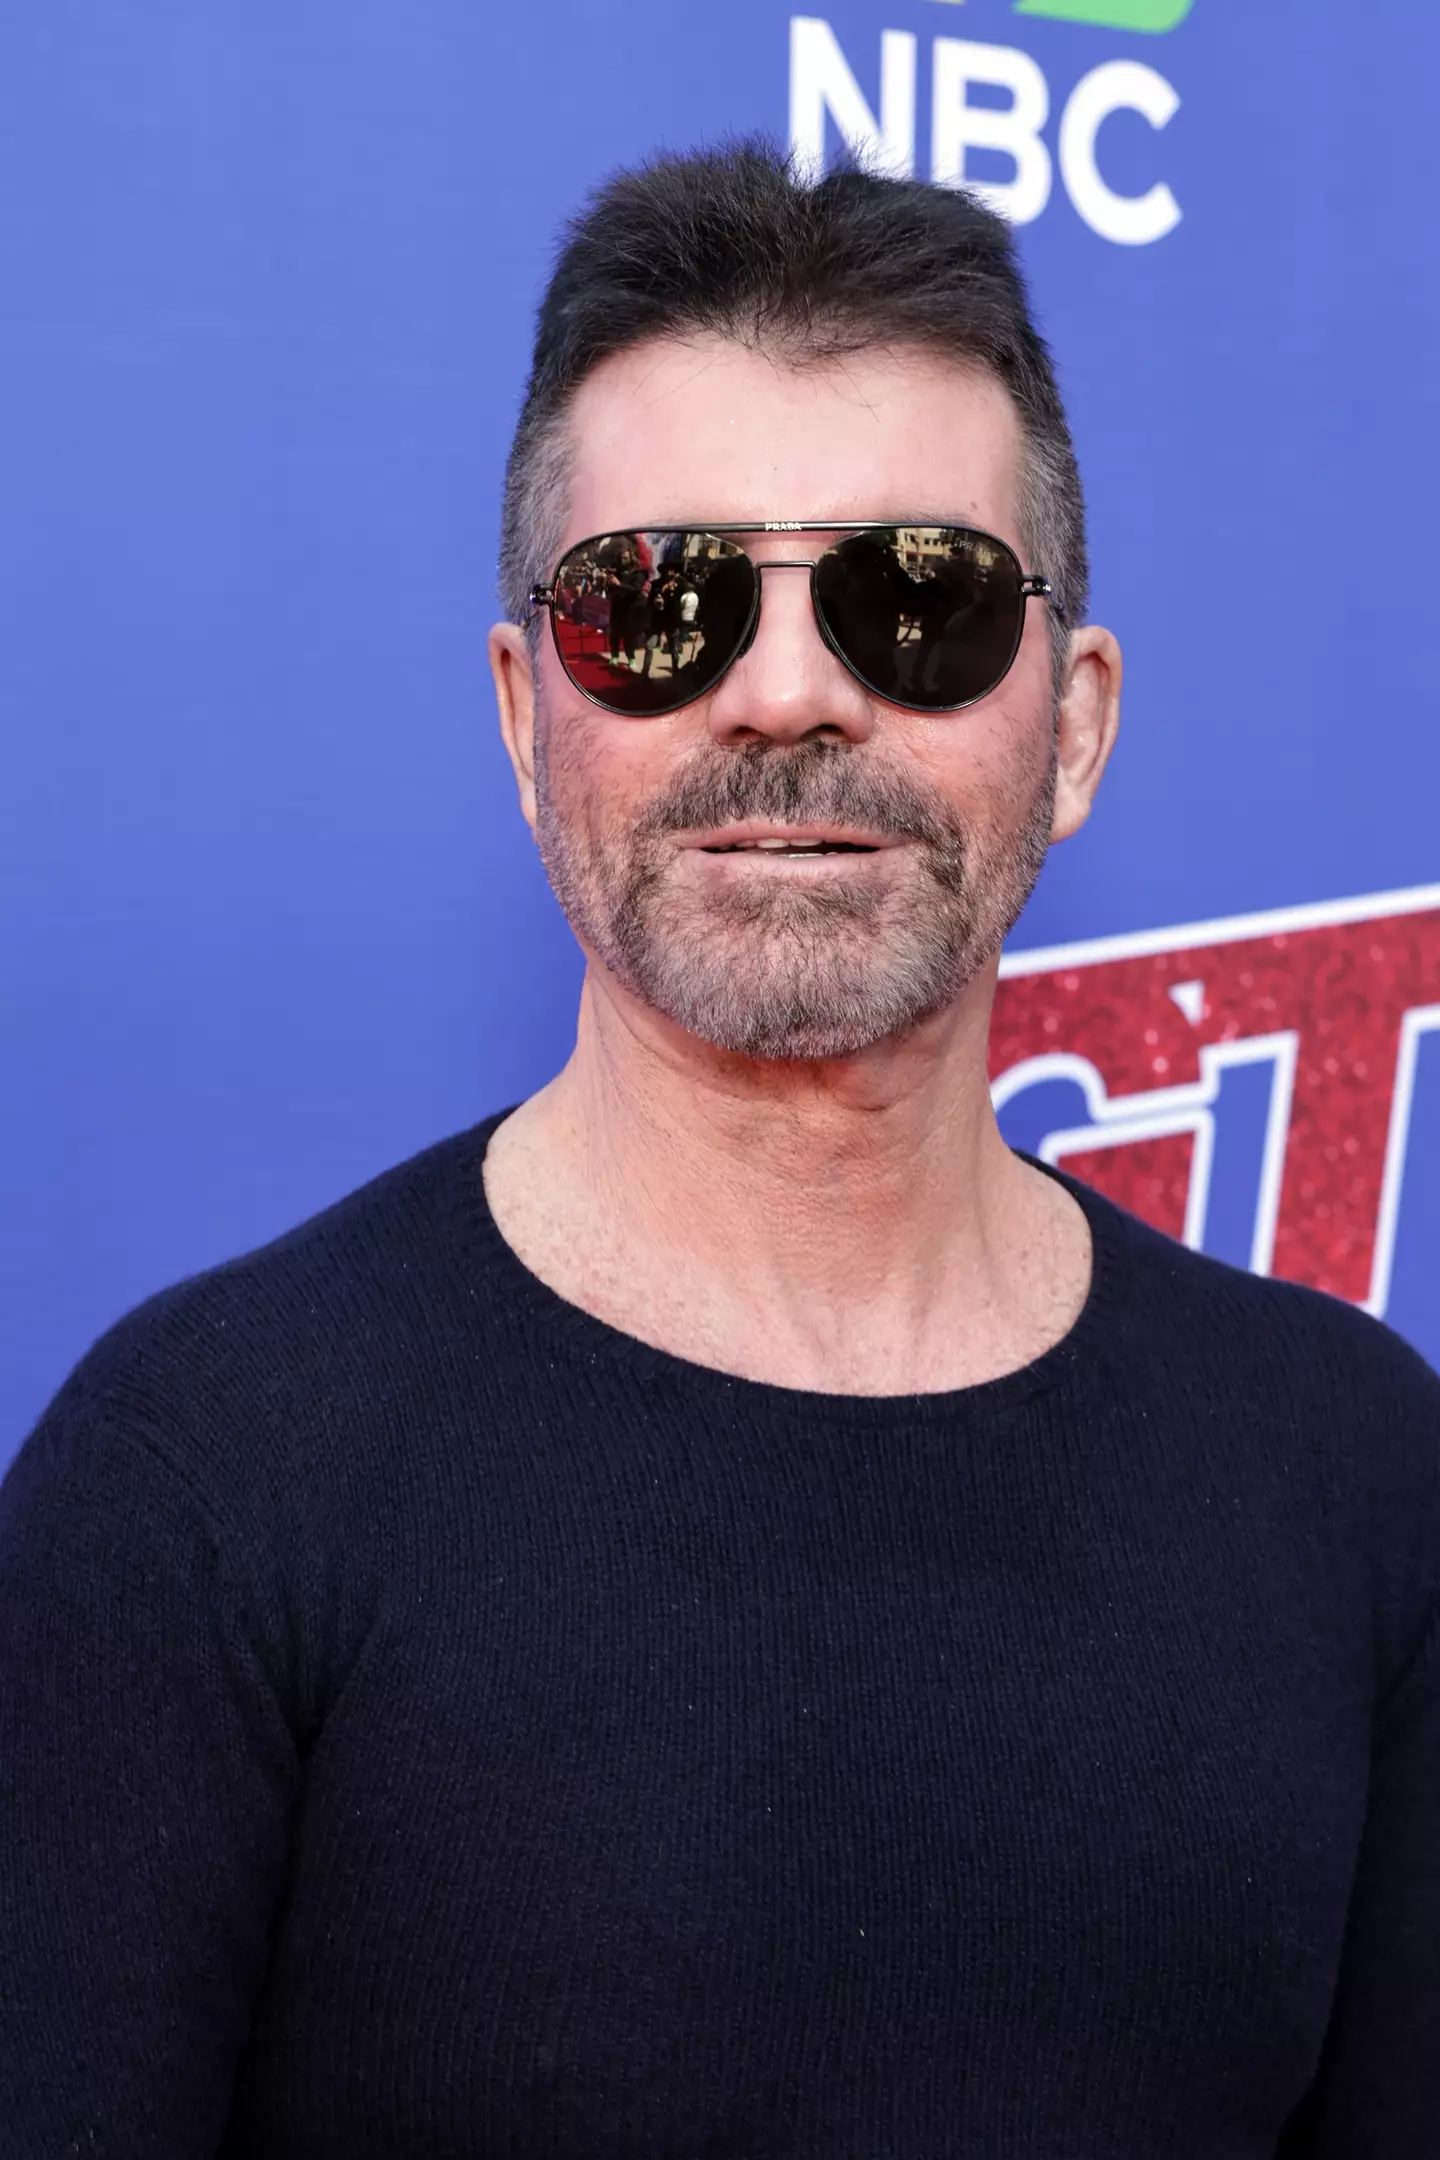 She says Simon Cowell was the only person to apologise over a decade after the attack.